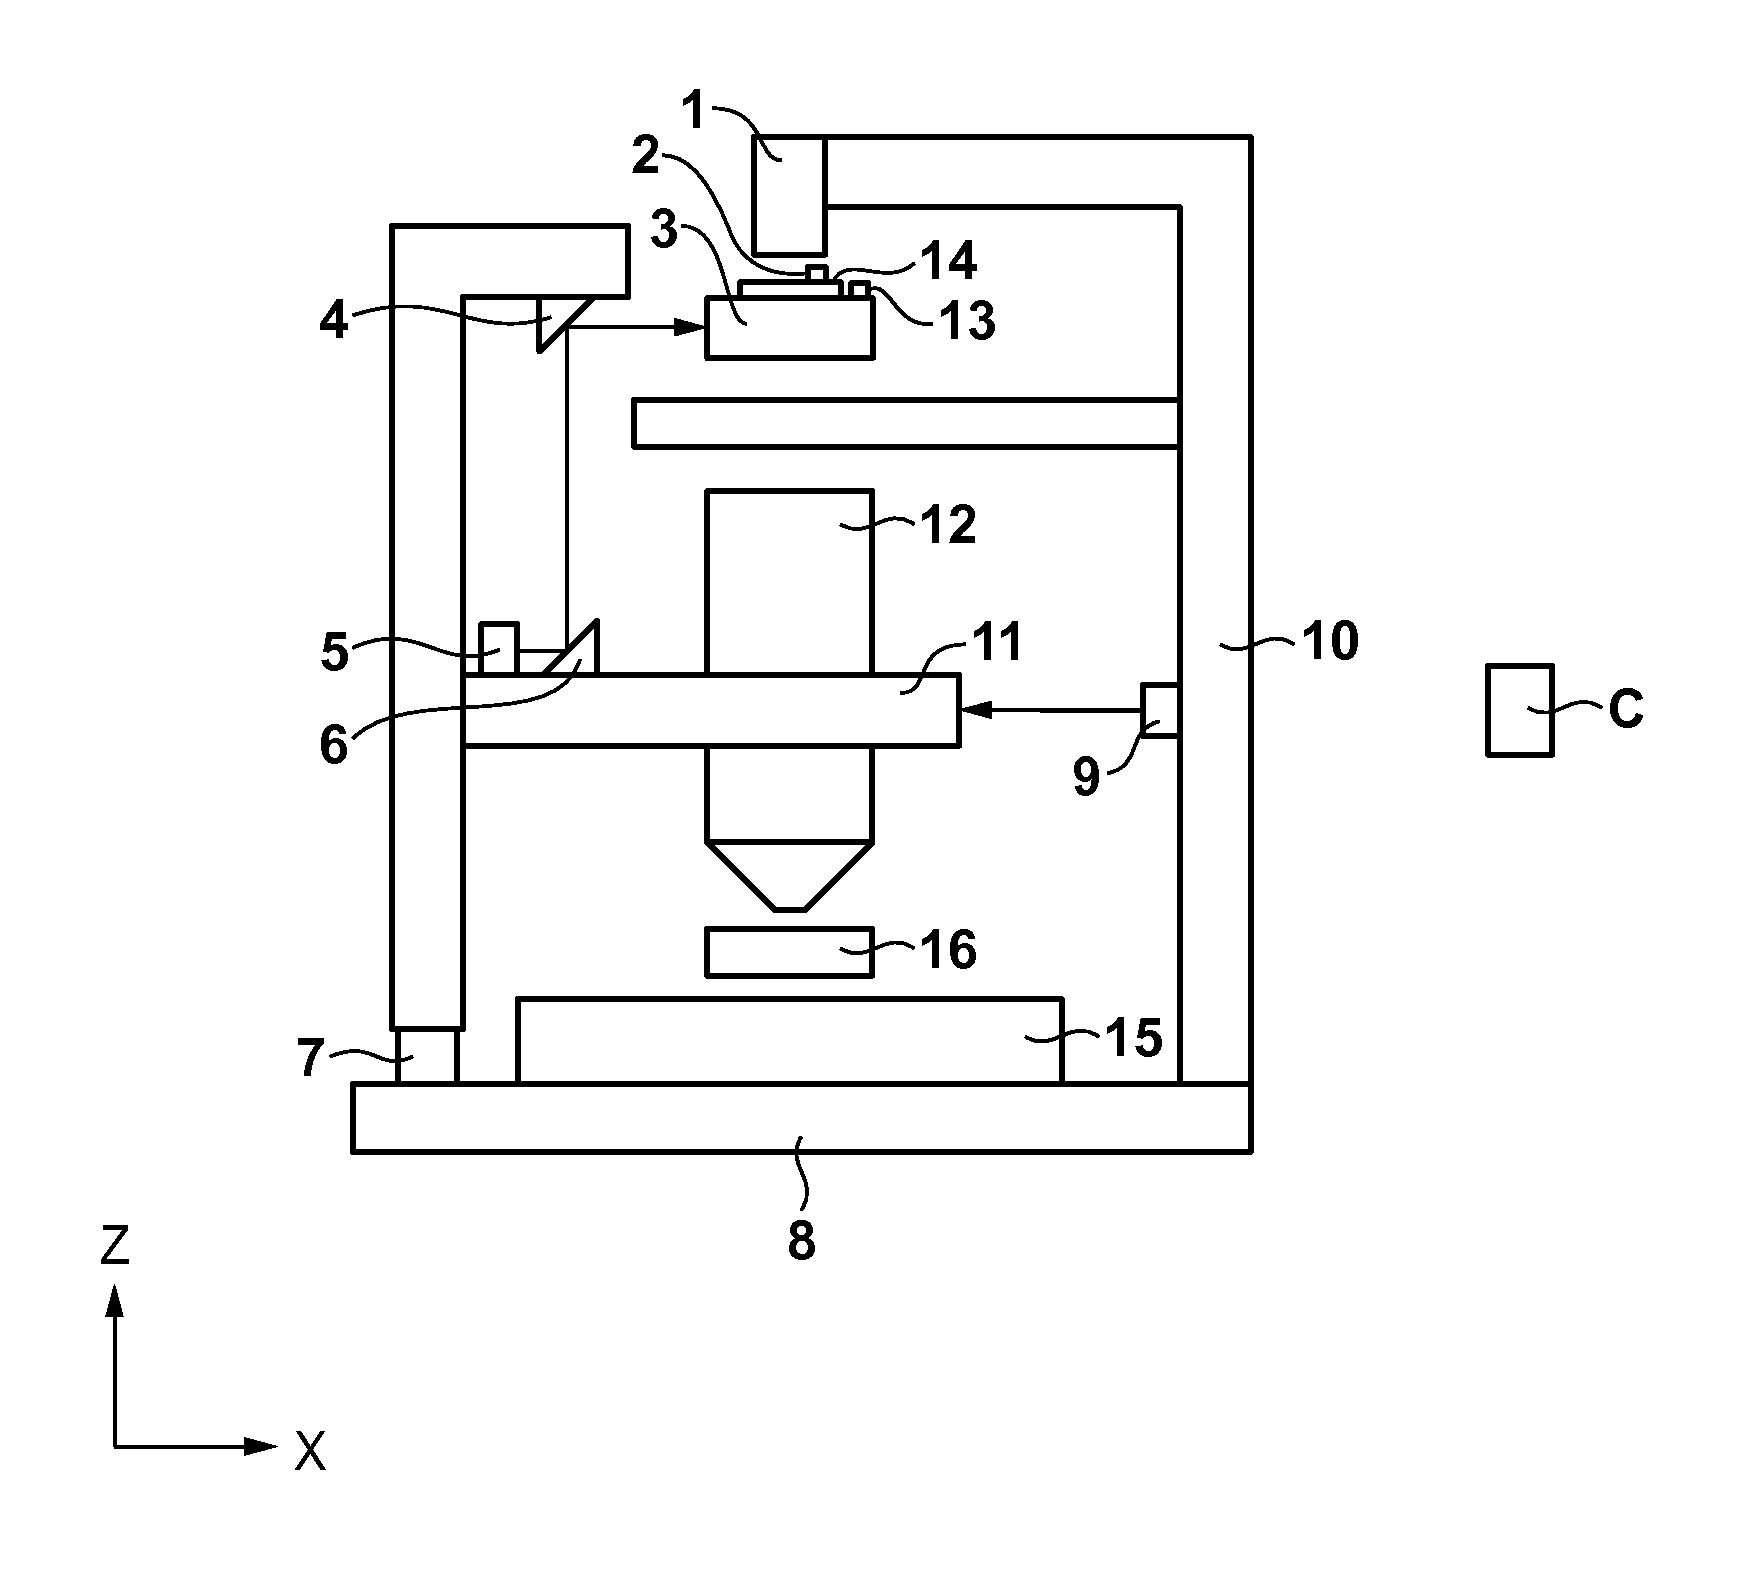 Measurement apparatus, lithography apparatus, and article manufacturing method